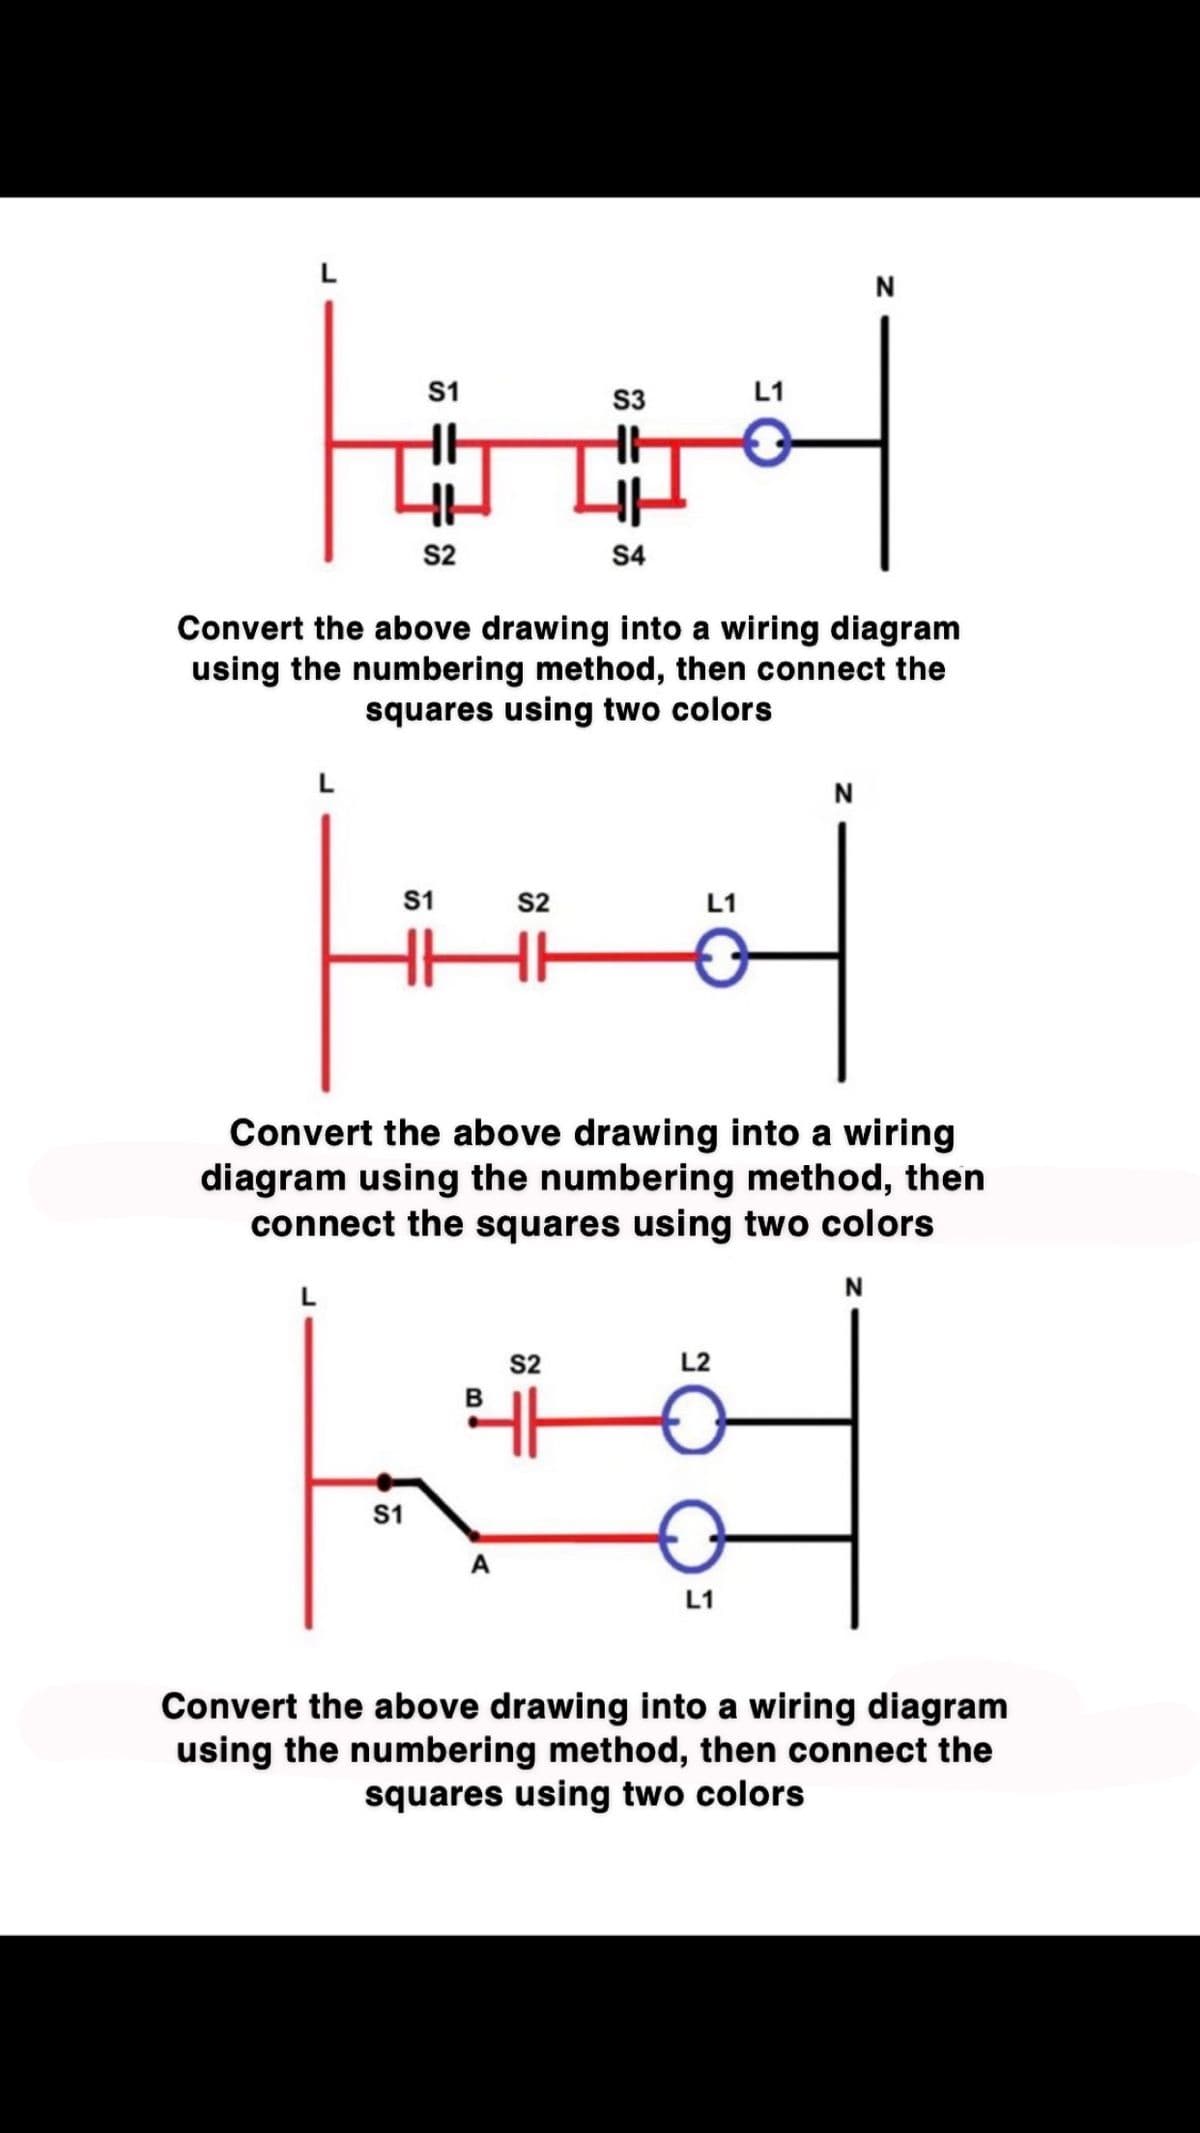 S1
S2
S1
S1
S2
HH
S3
Convert the above drawing into a wiring diagram
using the numbering method, then connect the
squares using two colors
S4
S2
B
41
L1
L1
Convert the above drawing into a wiring
diagram using the numbering method, then
connect the squares using two colors
L2
L1
N
N
N
Convert the above drawing into a wiring diagram
using the numbering method, then connect the
squares using two colors